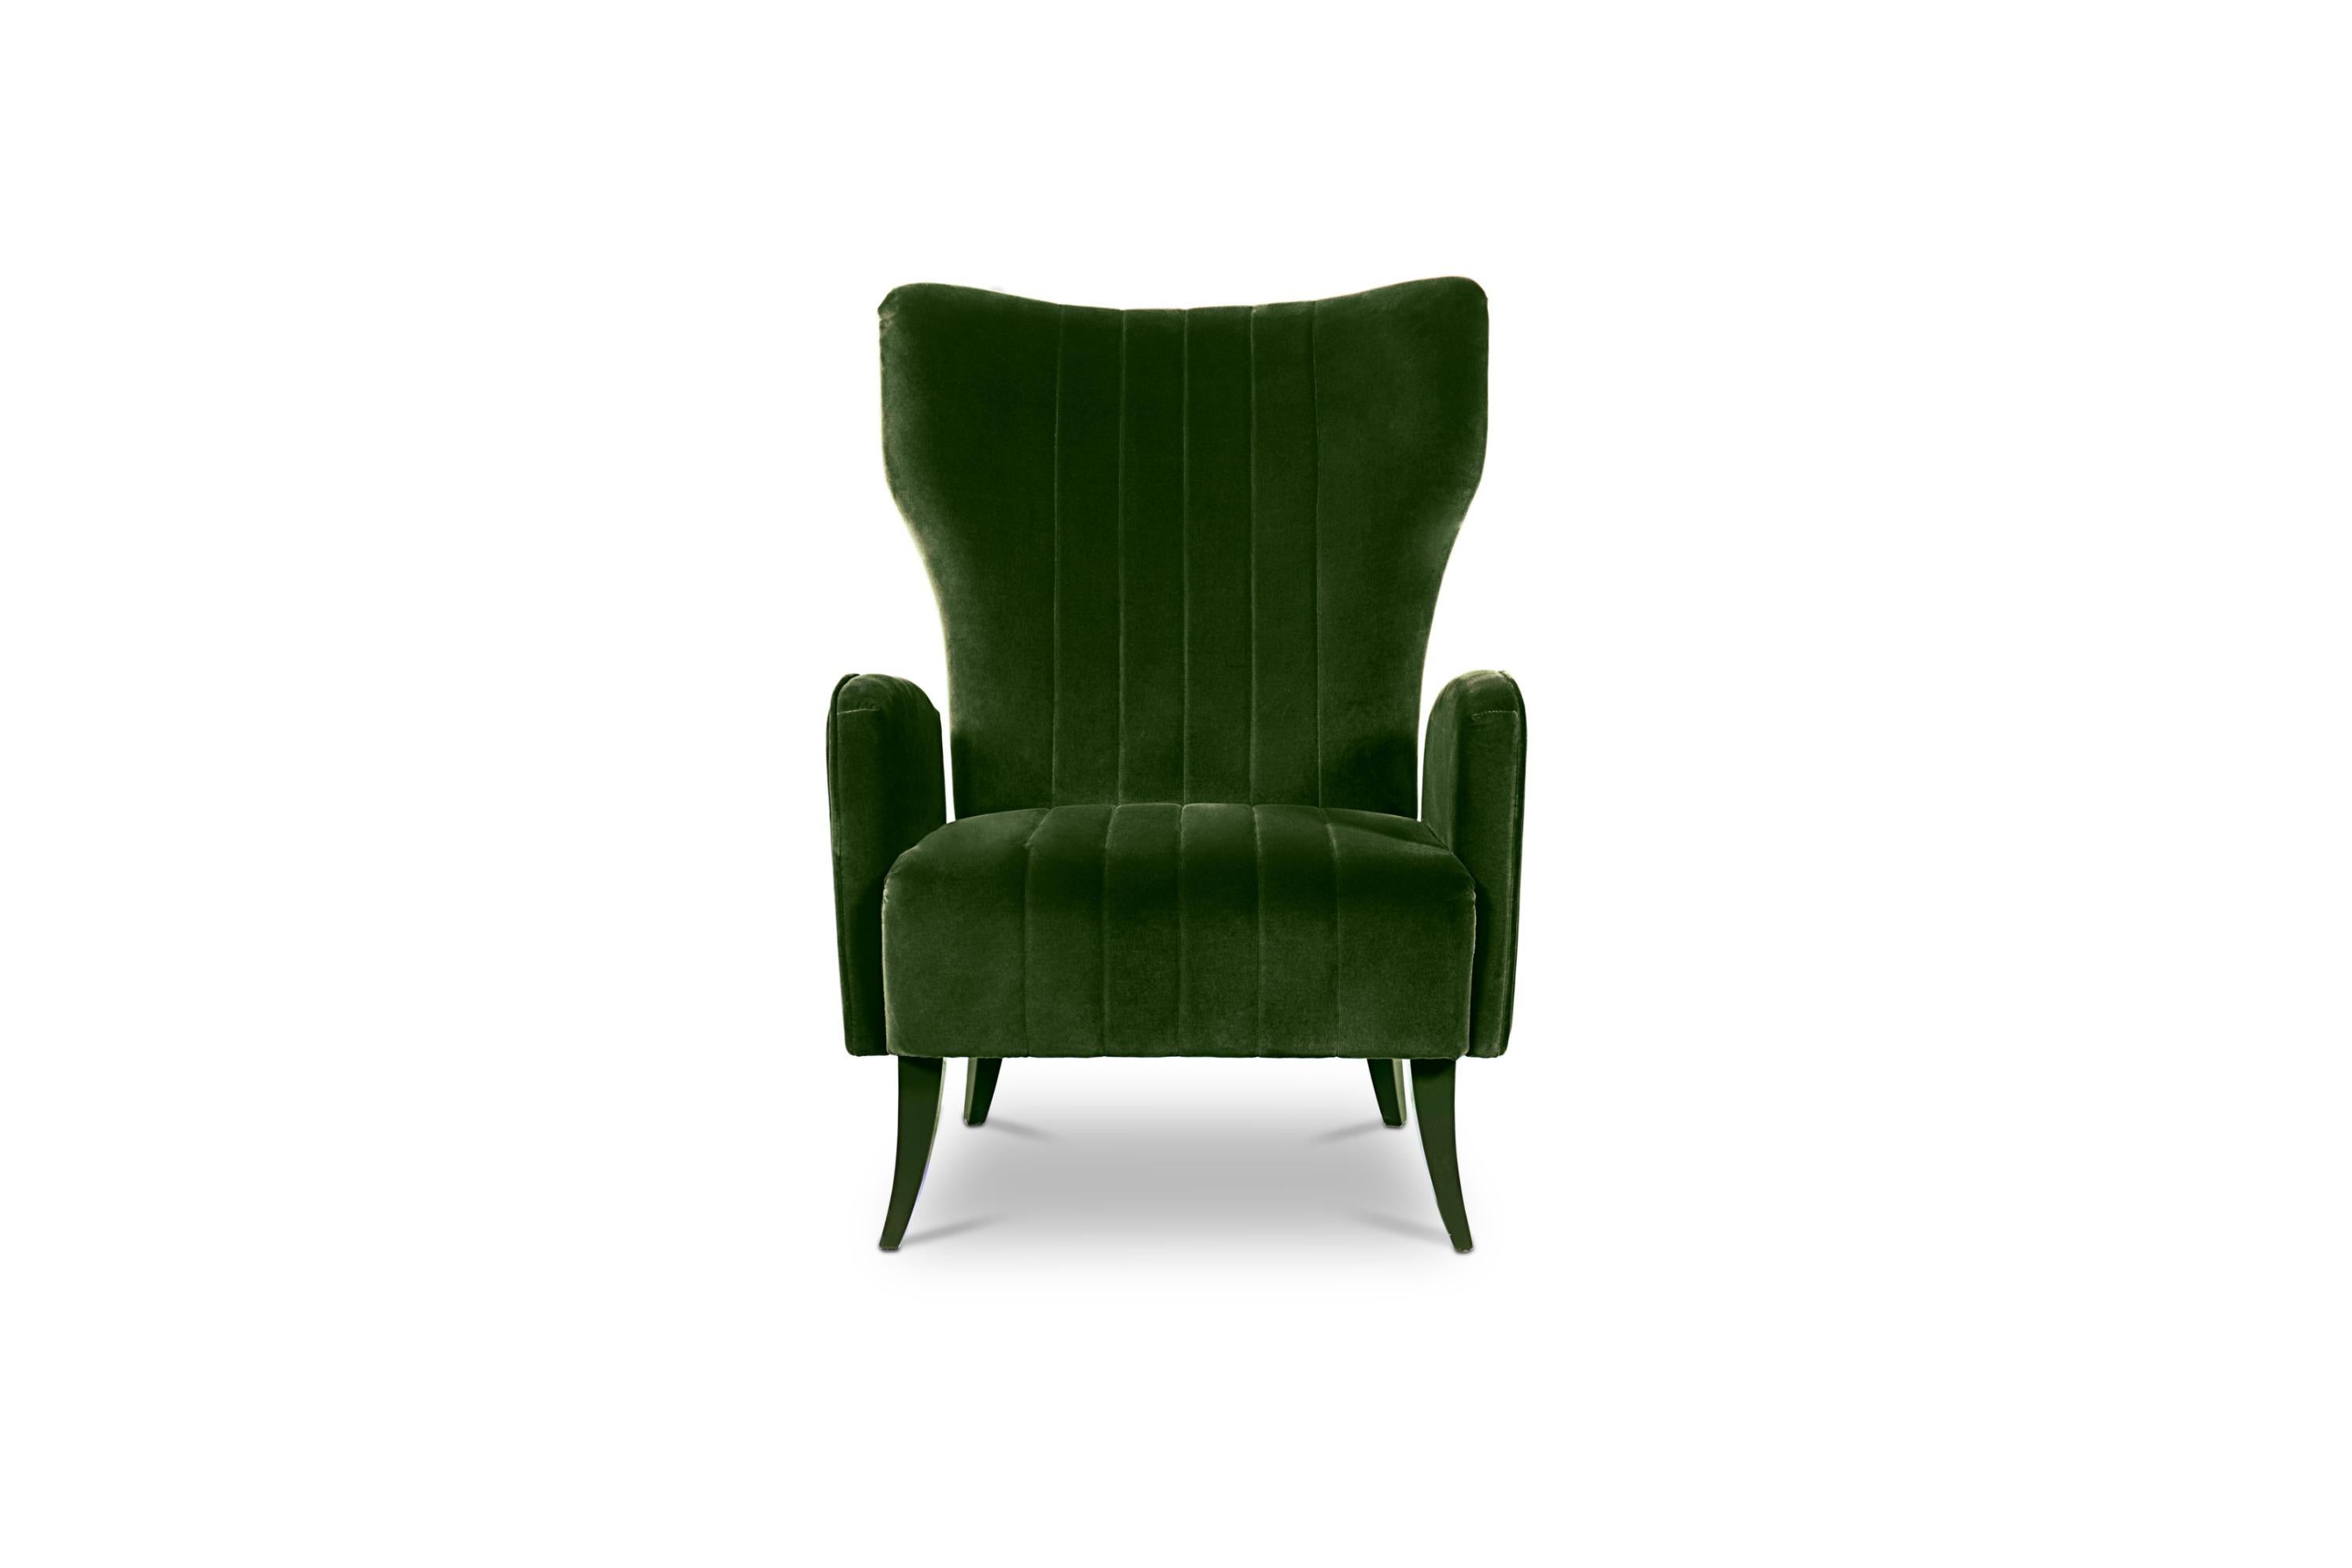 The Davis sea, located along the coast of East Antarctica, inspired our designers to create Davis wingback armchair. This fully upholstered high-back chair will add character and elegance to any modern interior design thanks to its timeless